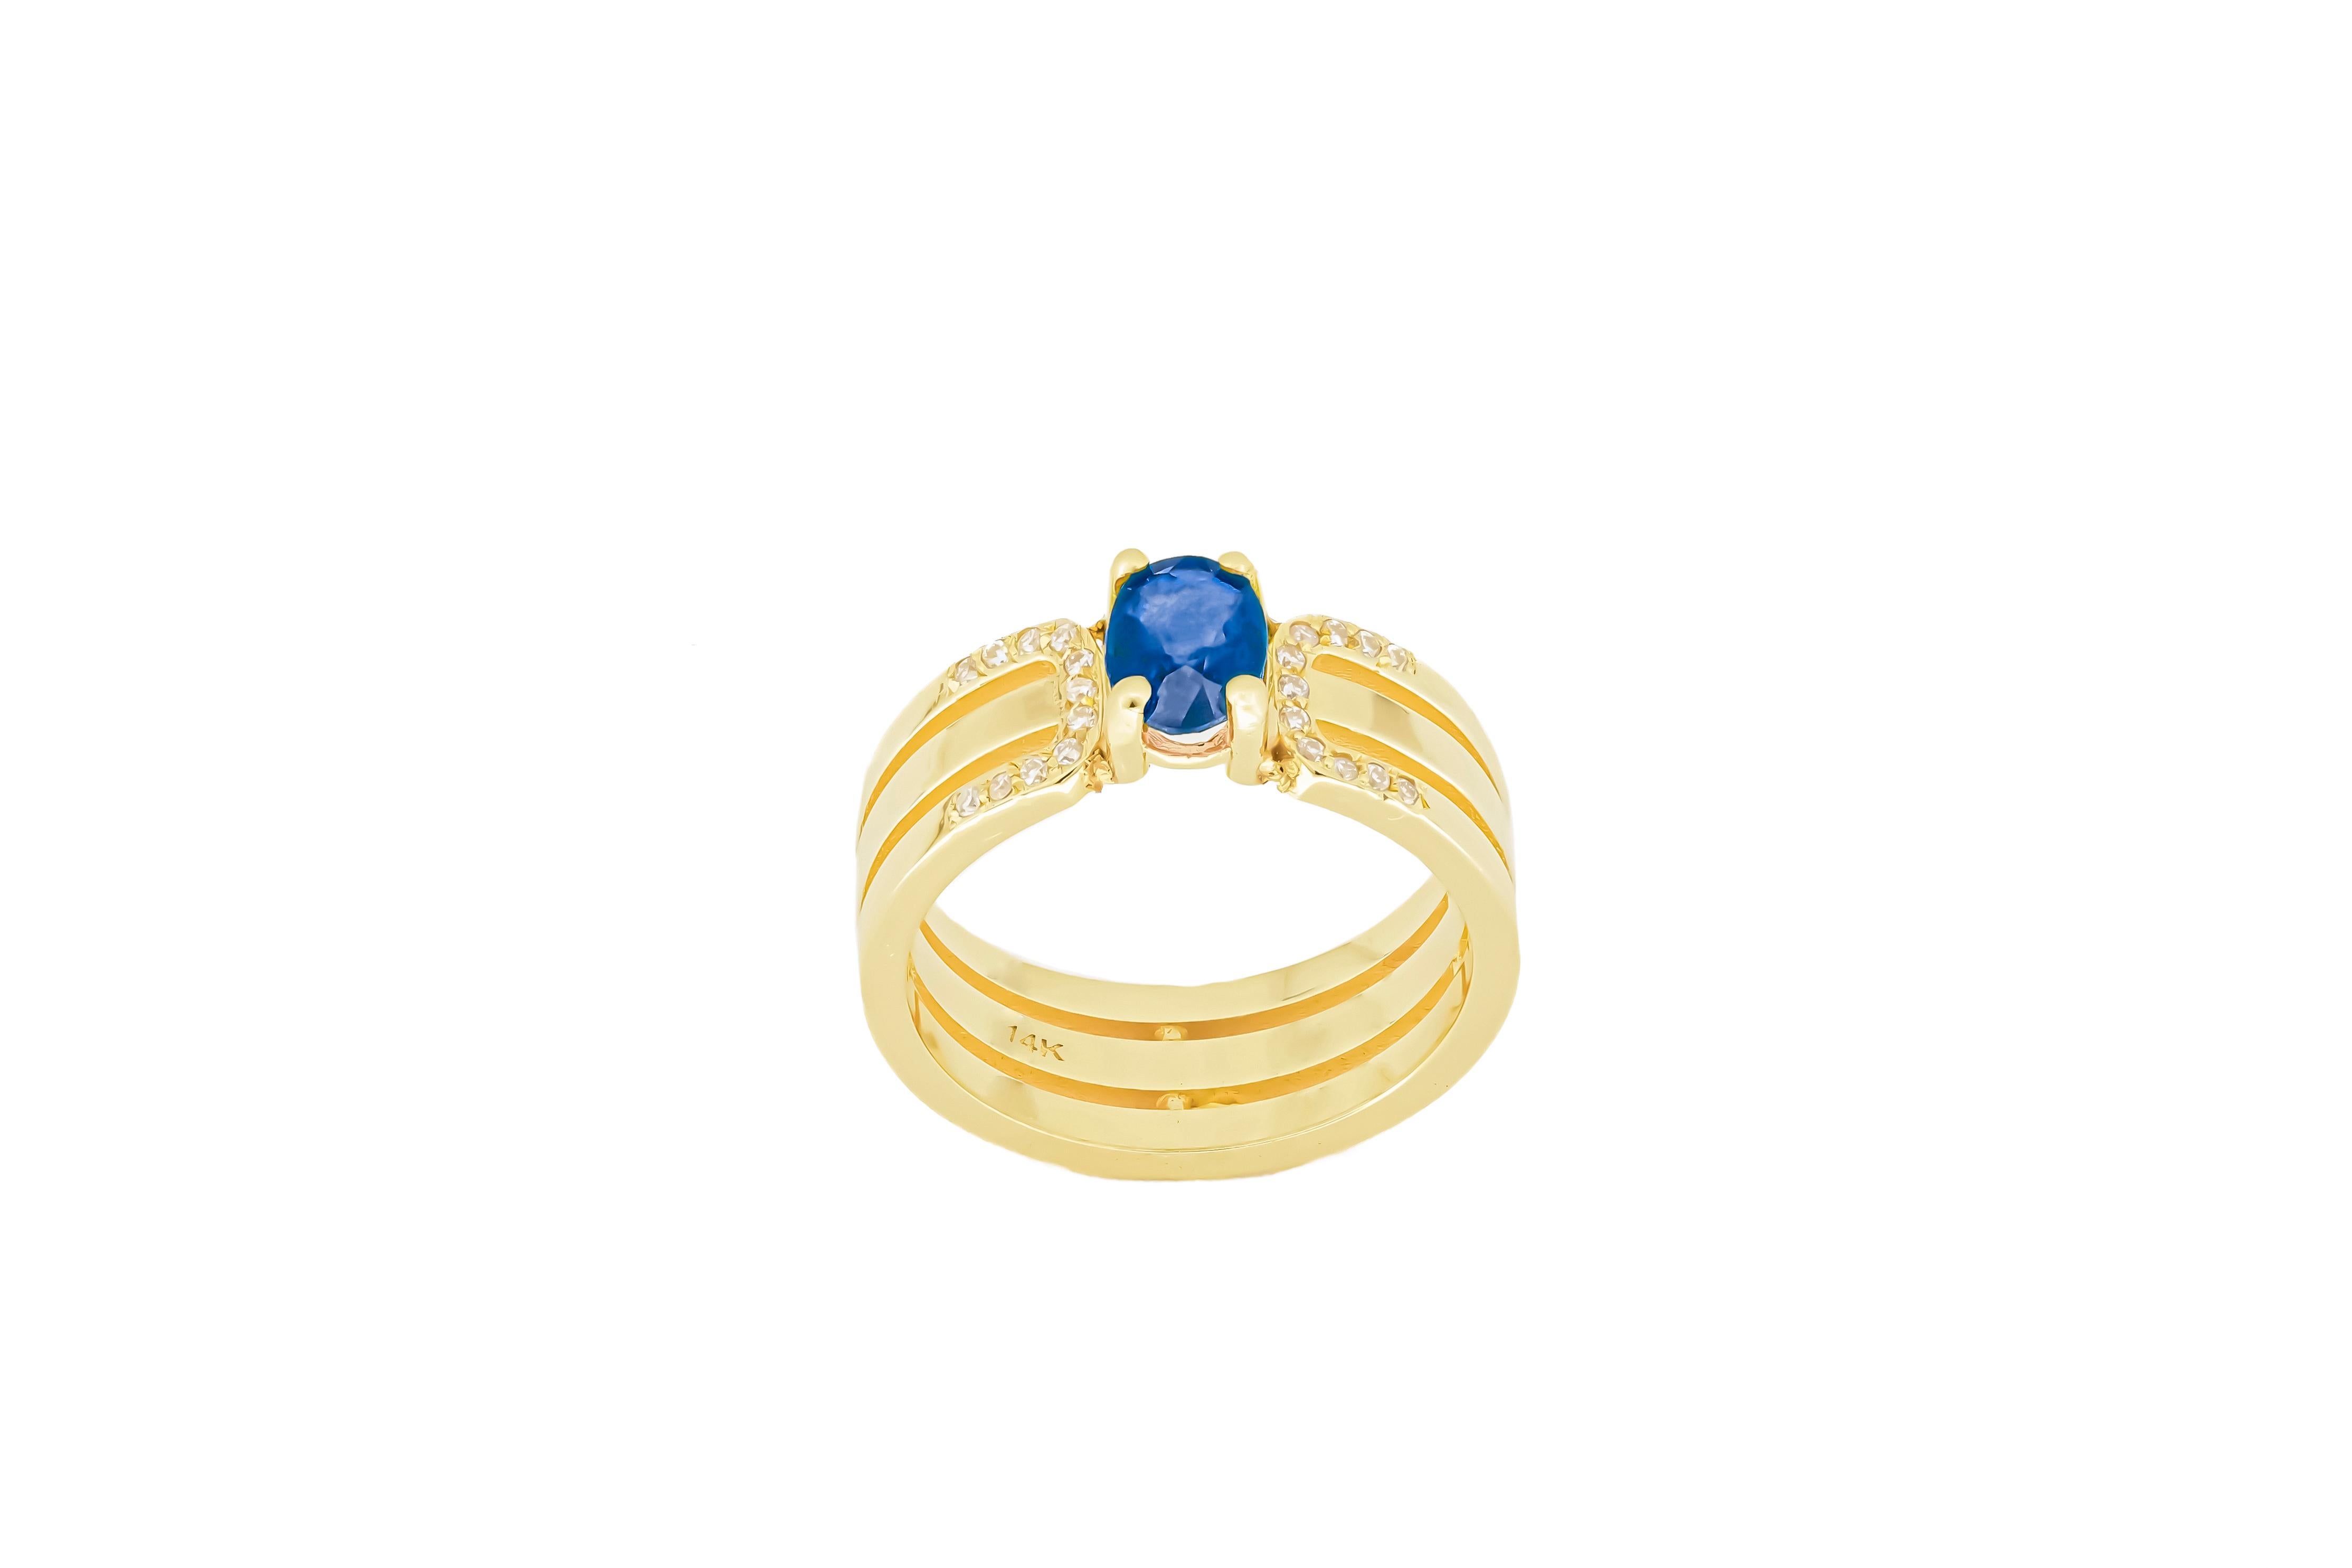 Men's 14 K Gold Mens Ring with Sapphire.  For Sale